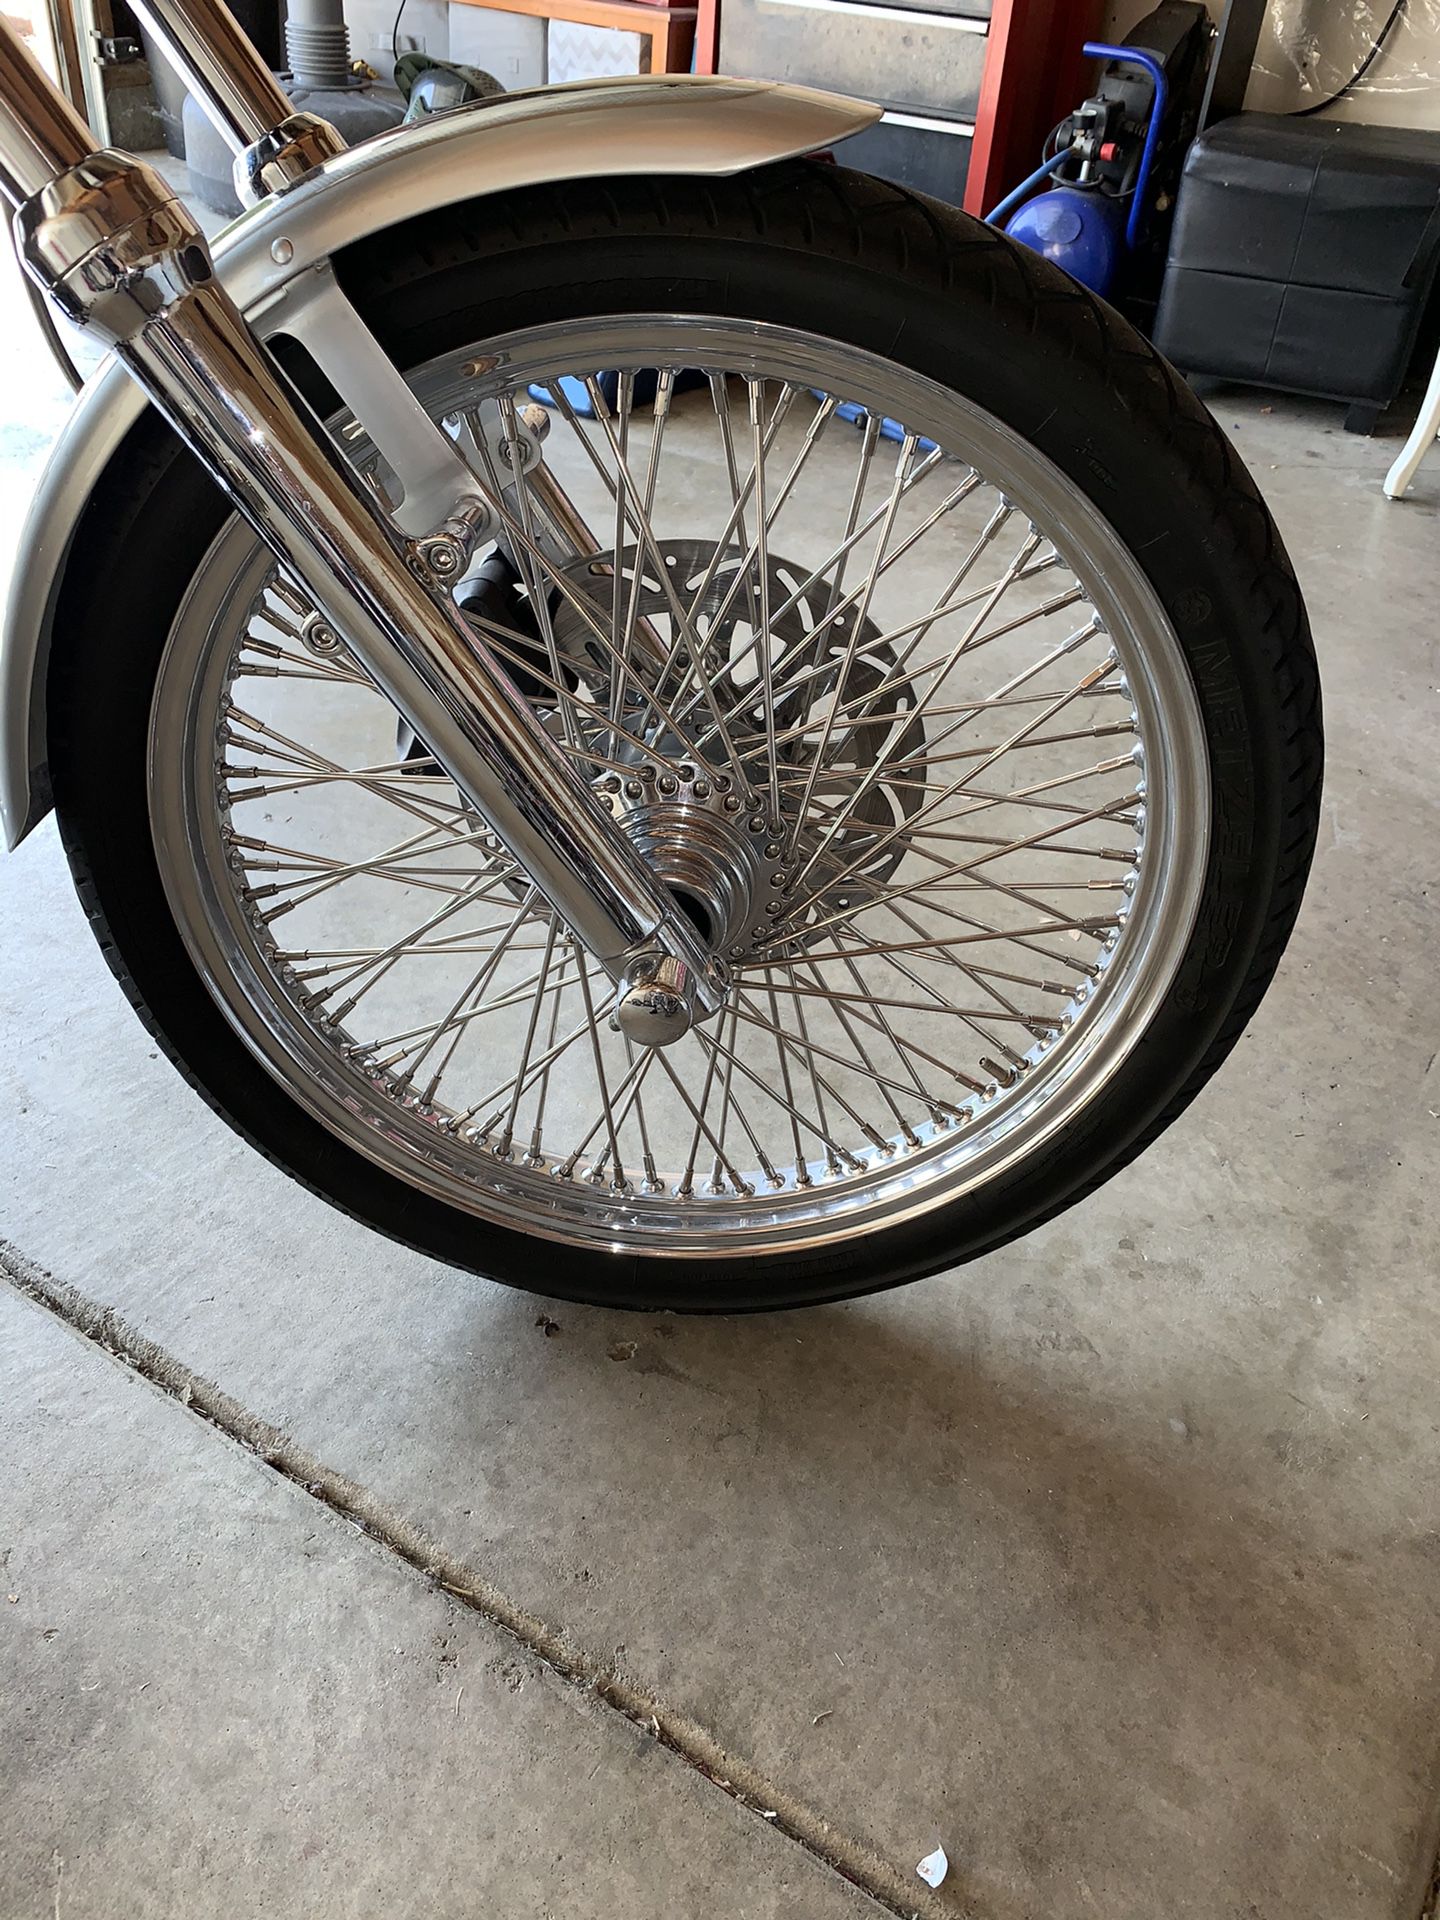 21” Harley Davidson front rim and tire